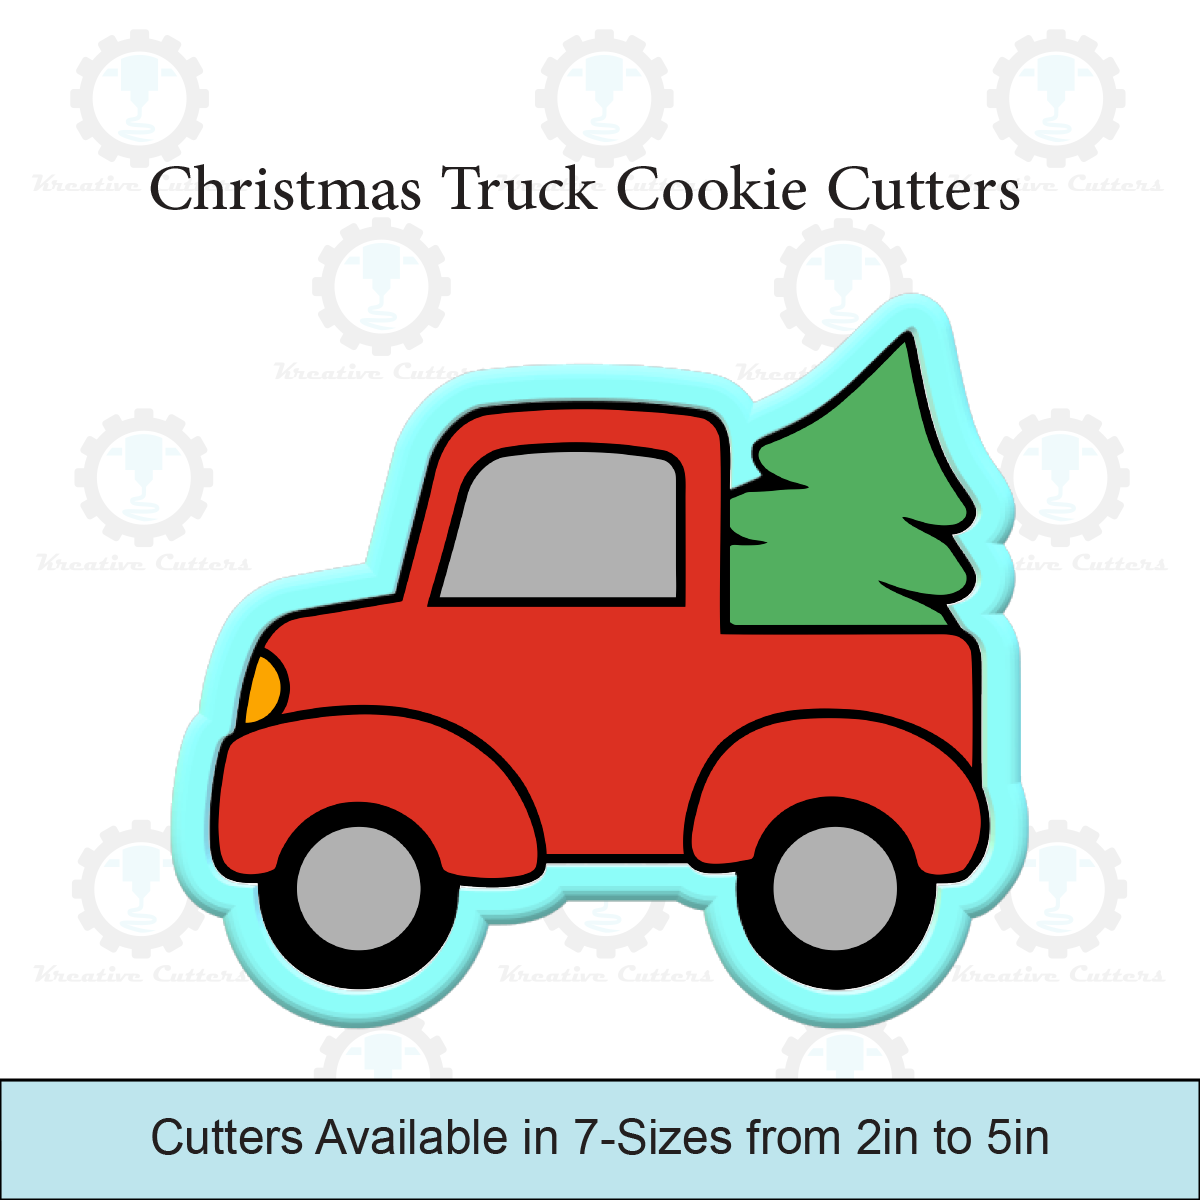 Christmas Truck Cookie Cutters